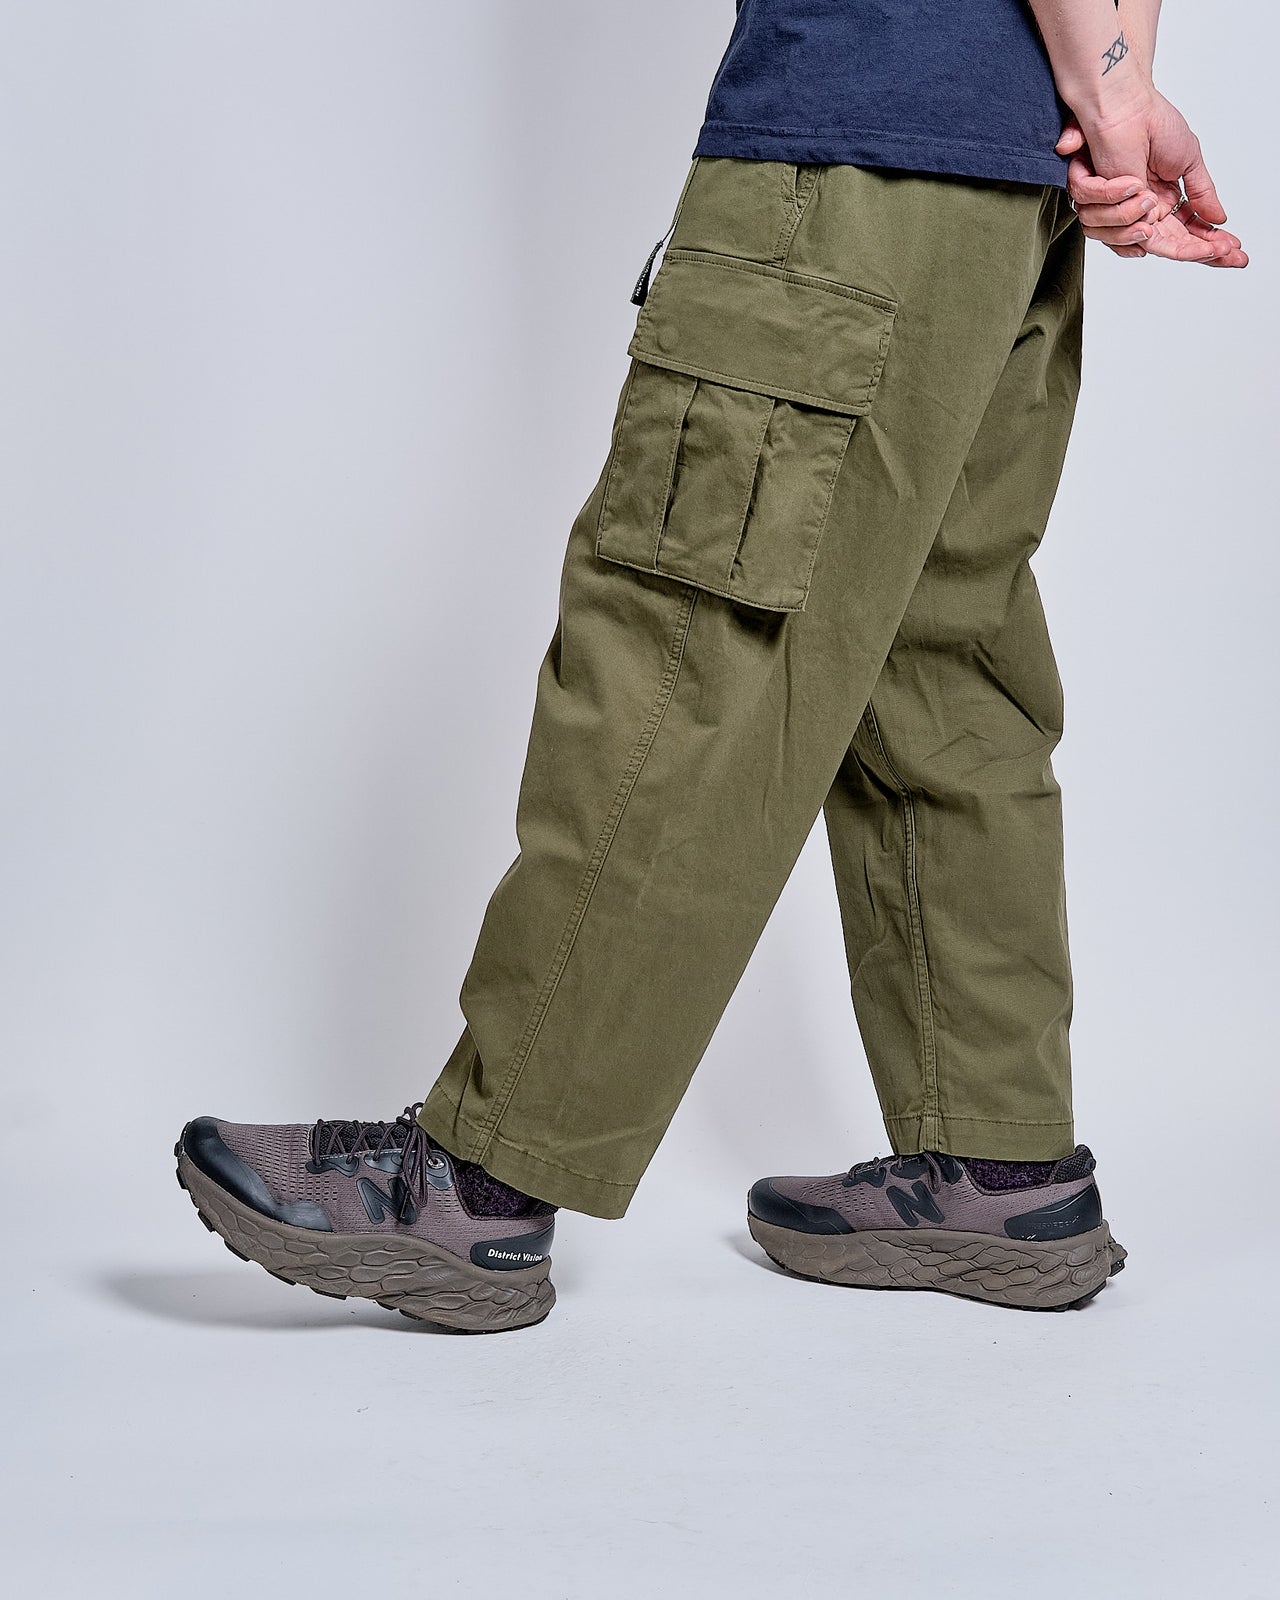 Flex Climber Cargo Pant in Olive